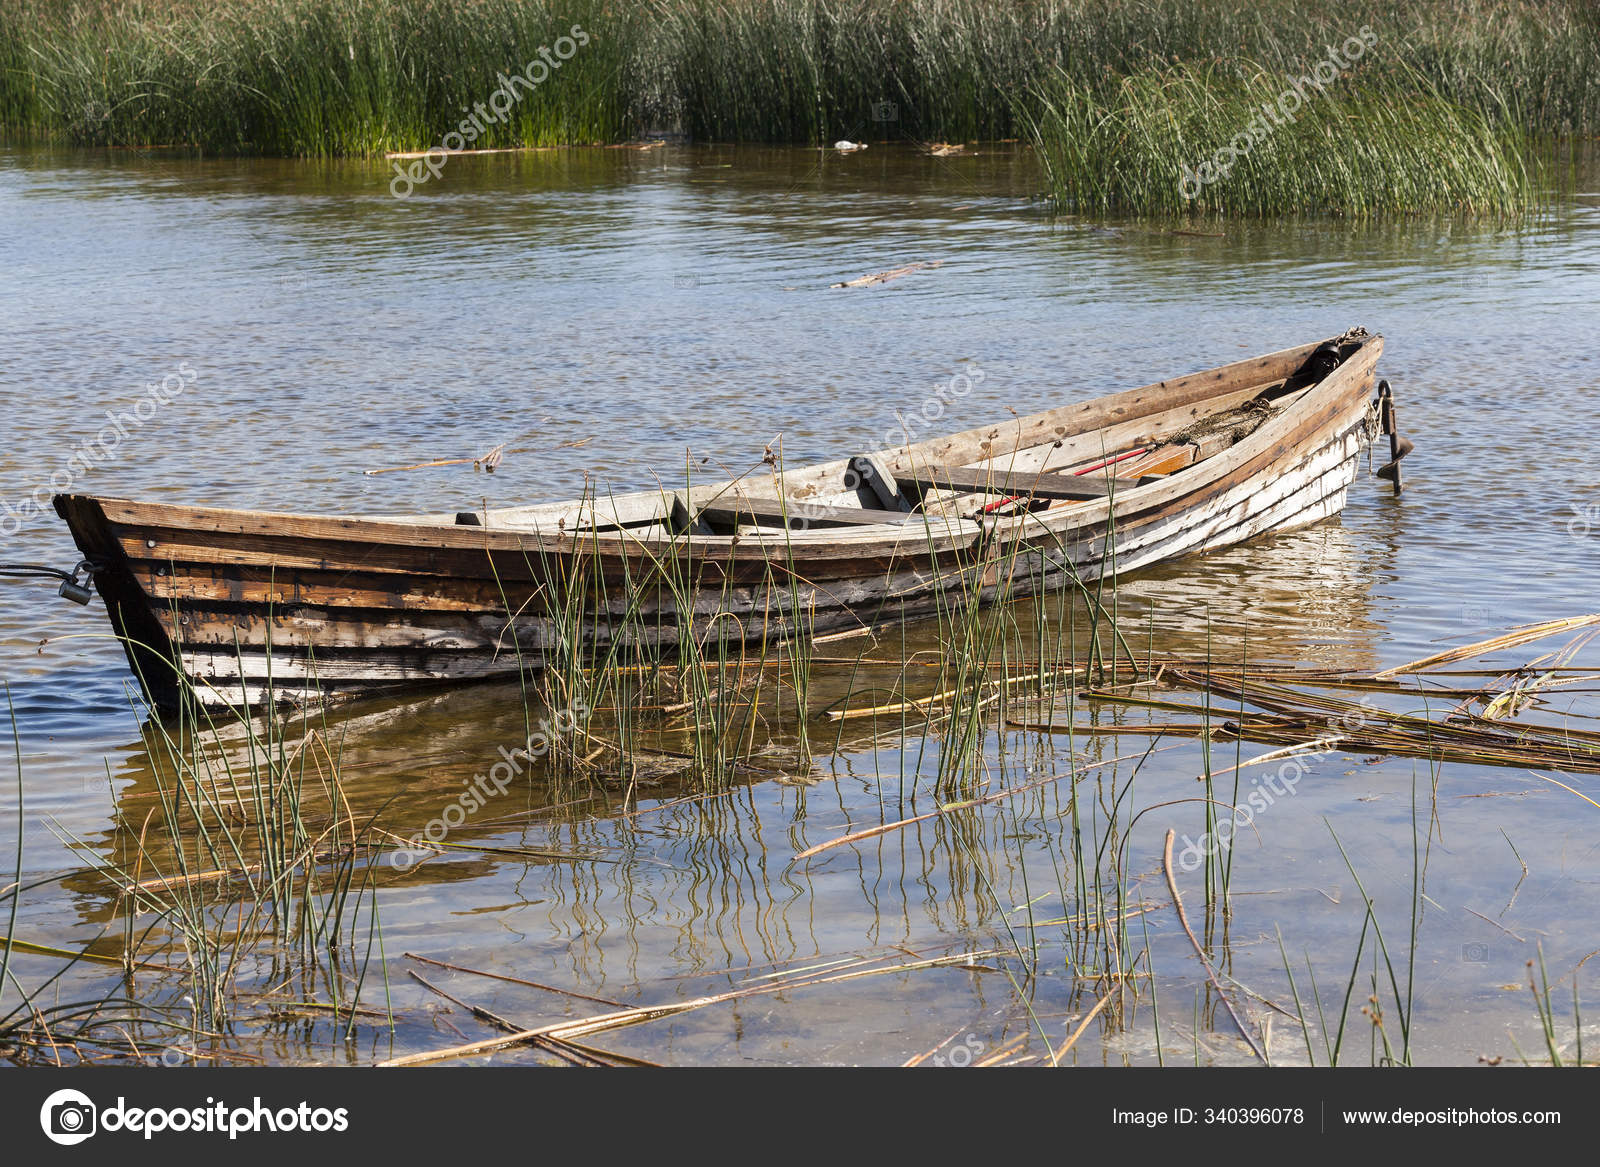 Old Wooden Boat Lake Used Local People Fishing Boat Poor — Stock Photo ©  PantherMediaSeller #340396078